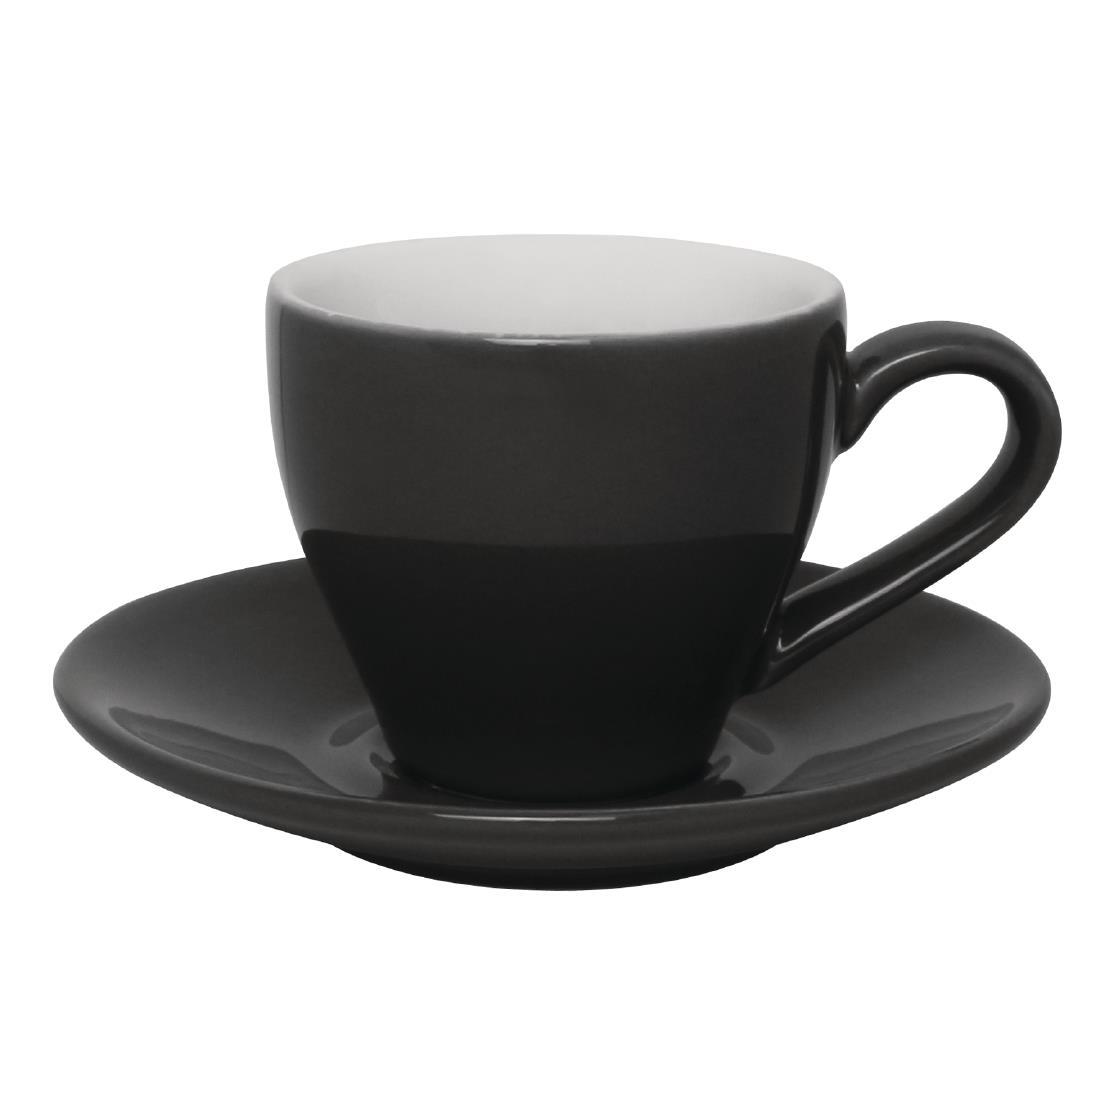 Olympia Cafe Espresso Cups Charcoal 100ml (Pack of 12) - GK072  - 2